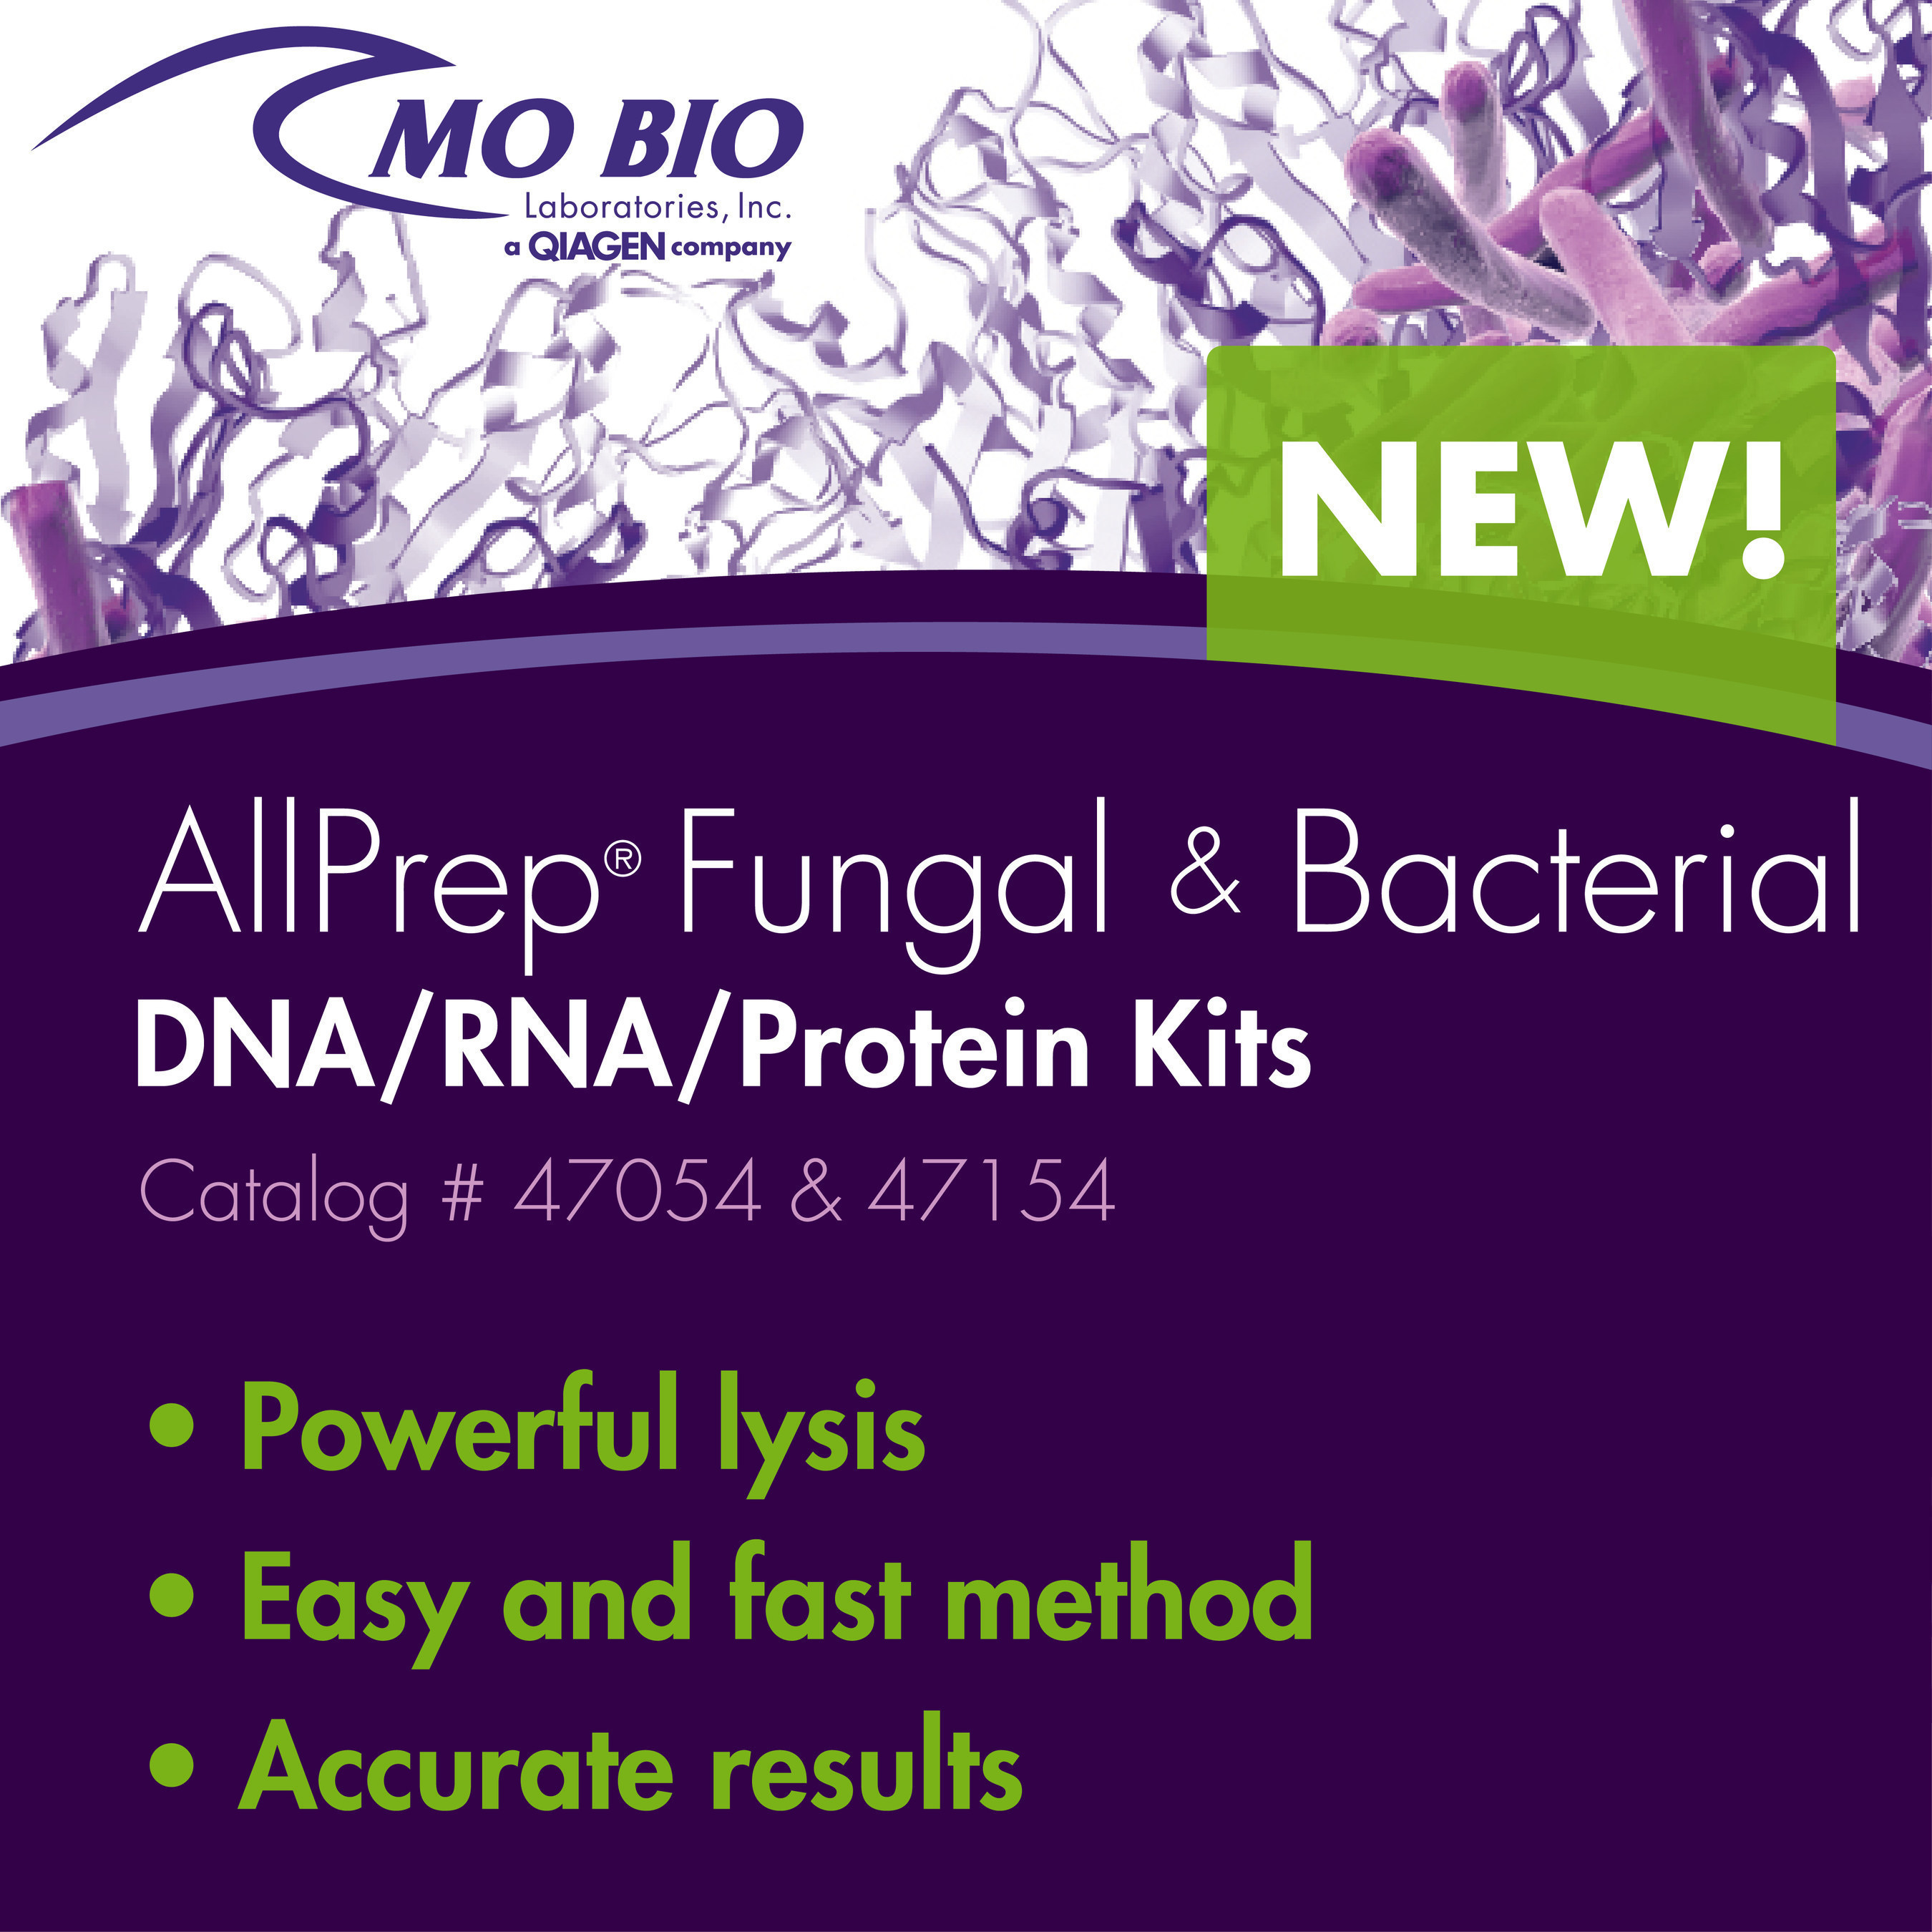 MO BIO Laboratories, a QIAGEN company, Launches the AllPrep Fungal and Bacterial DNA/RNA/Protein Kits.